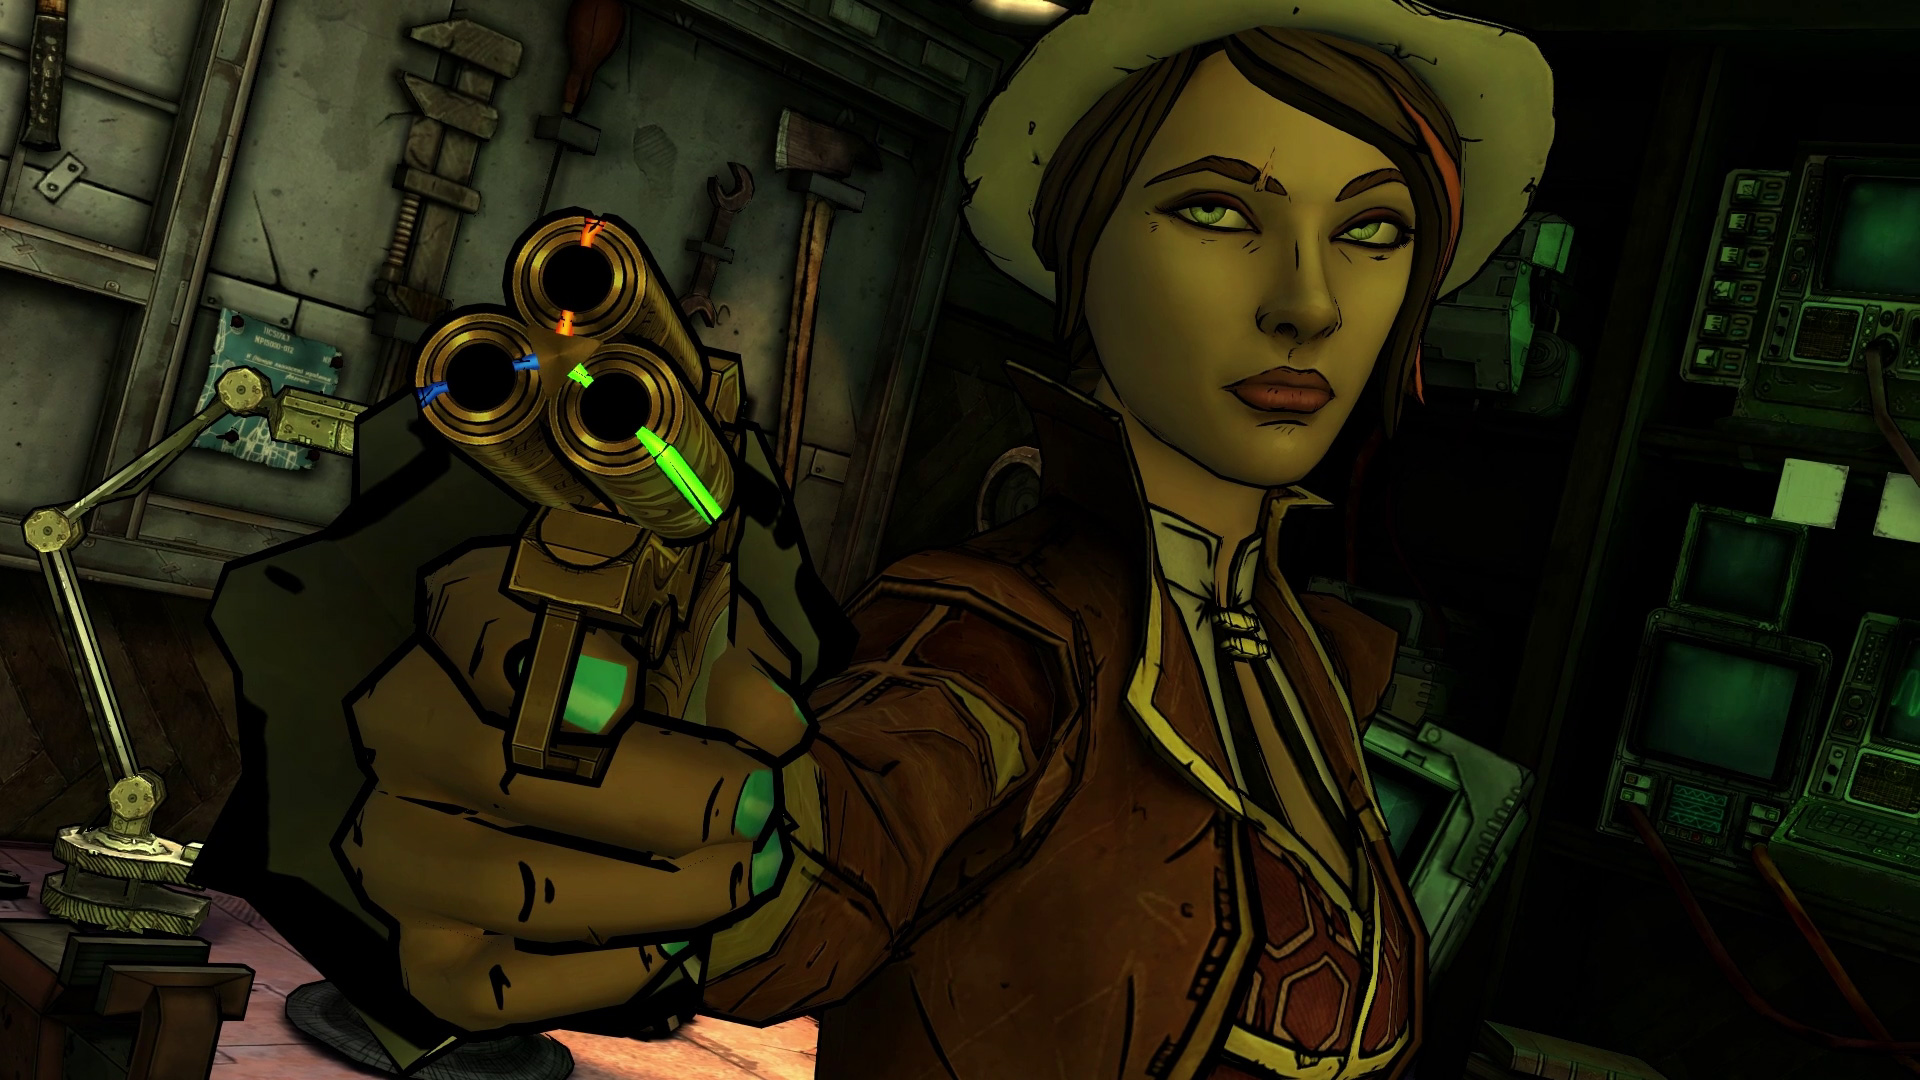 Tales from the Borderlands returns to digital storefronts in February